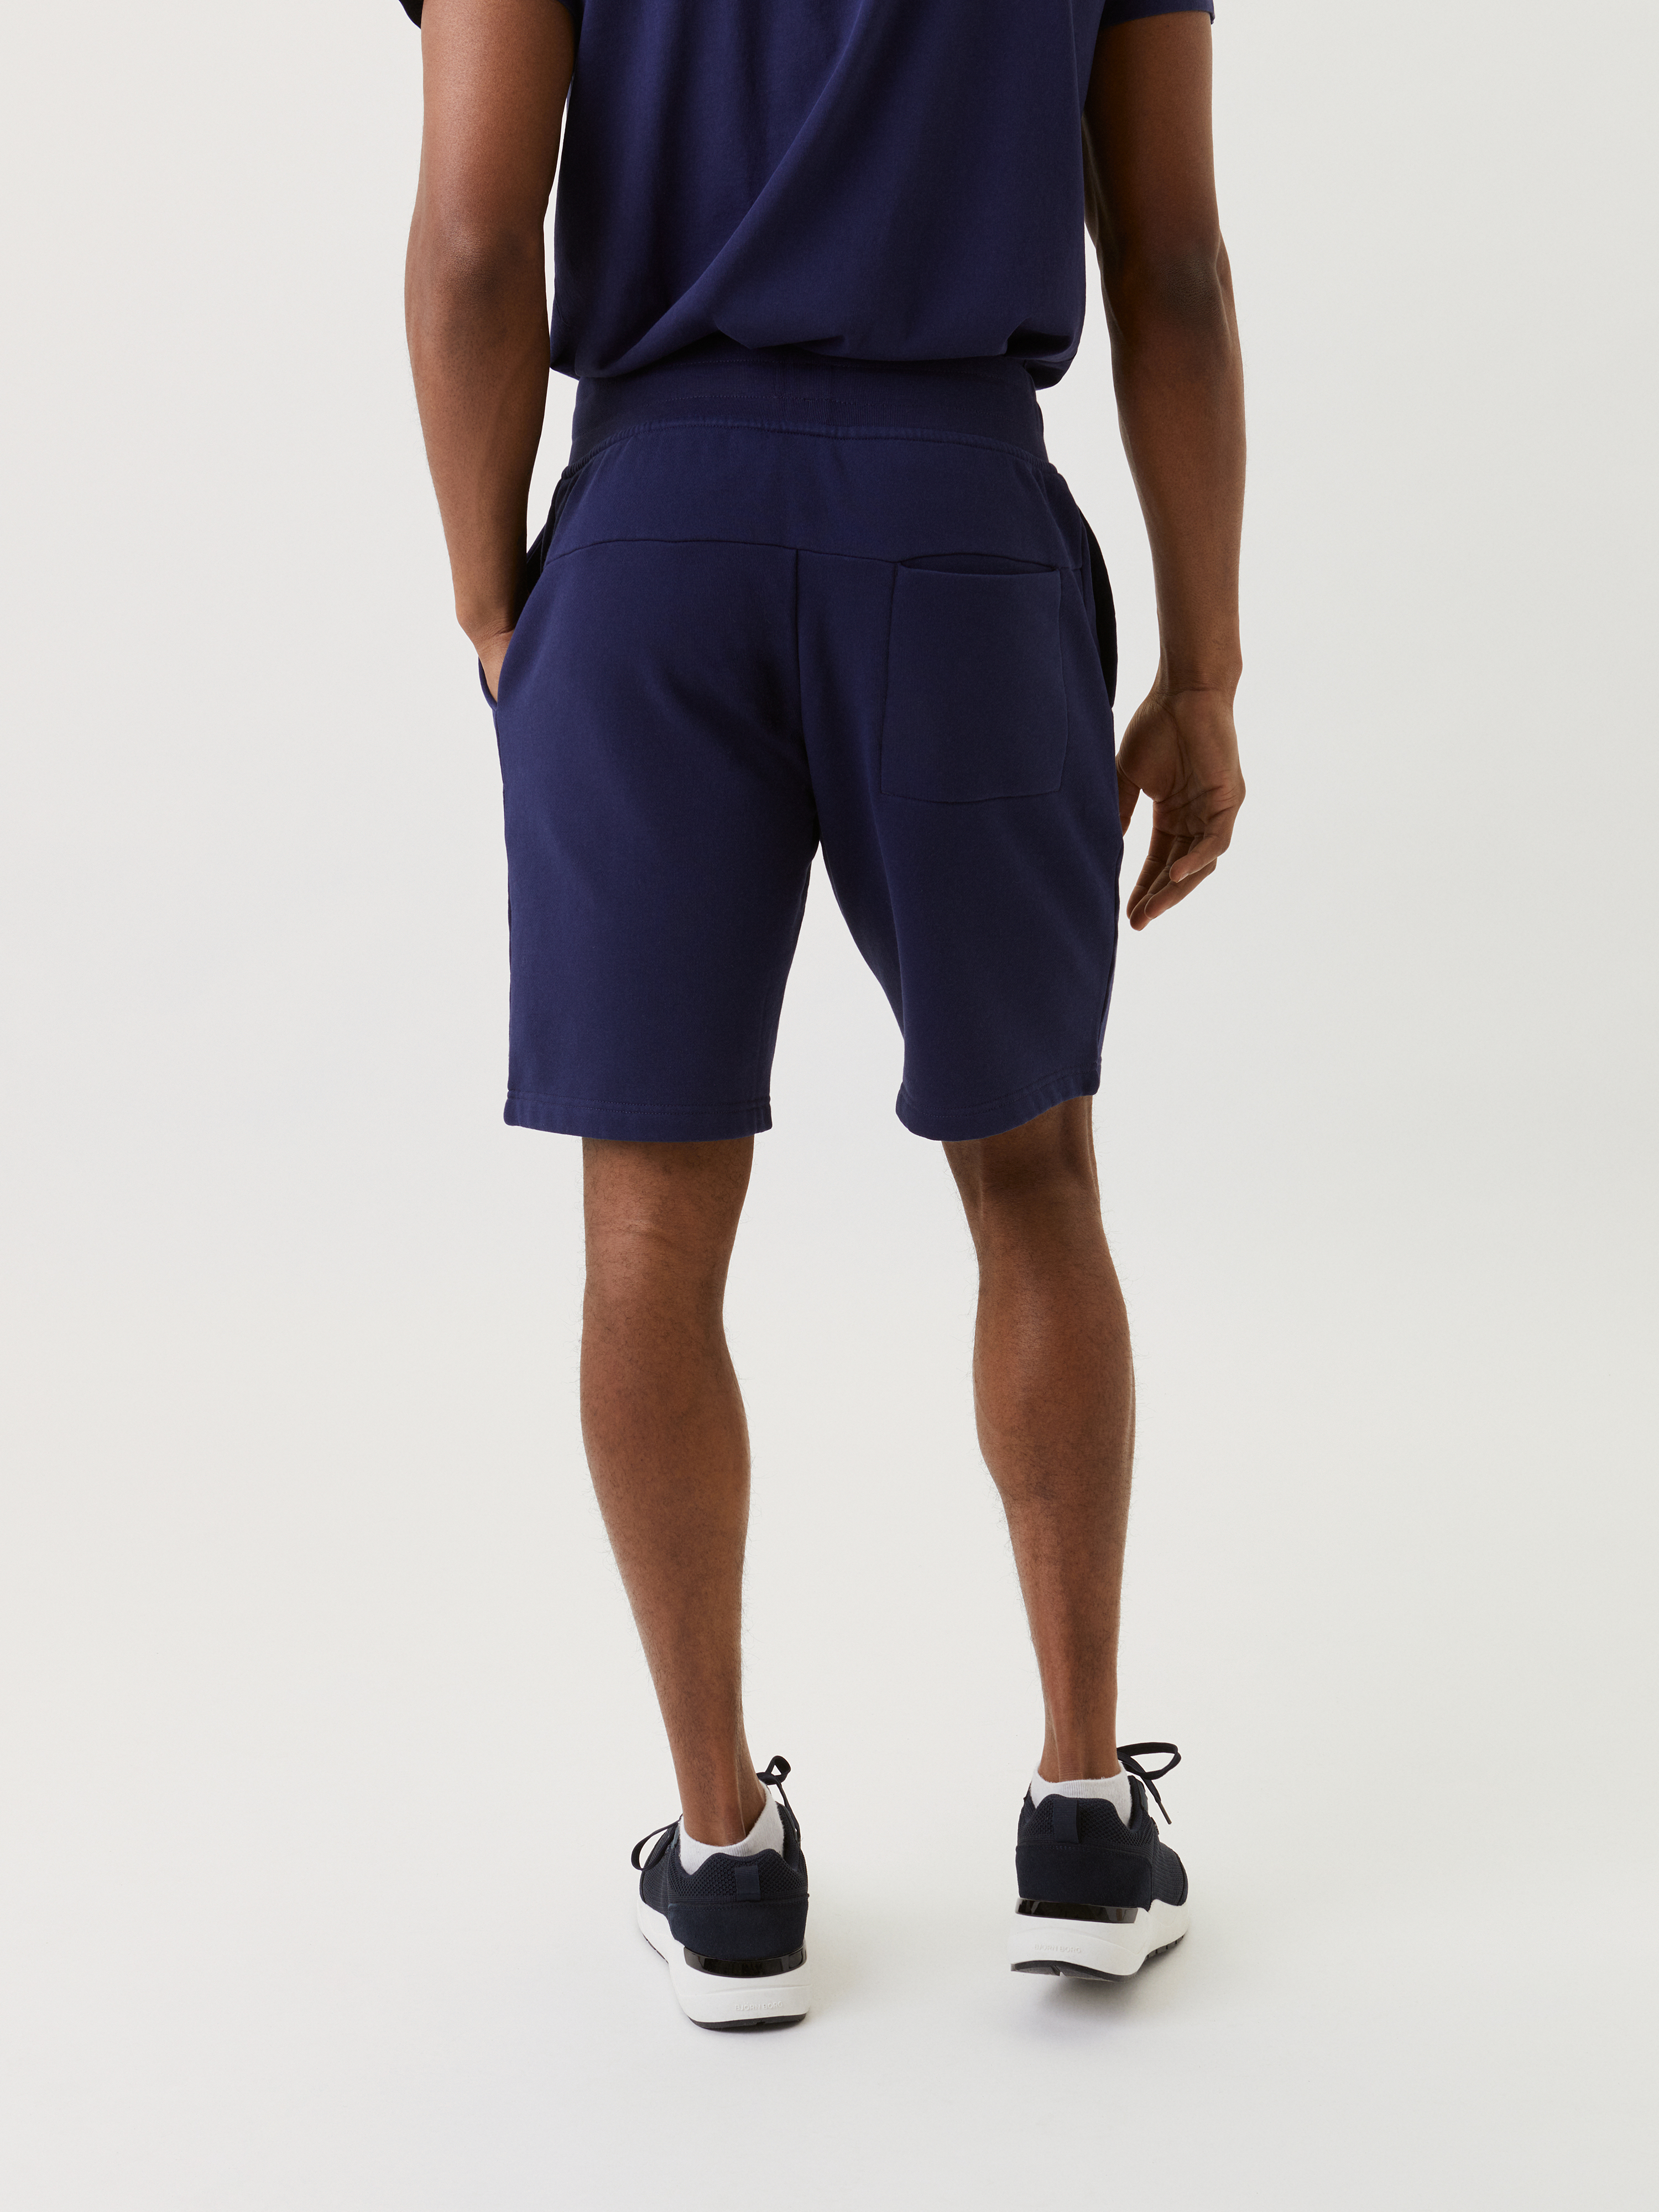  Centre Shorts, Washed Out Blue, L